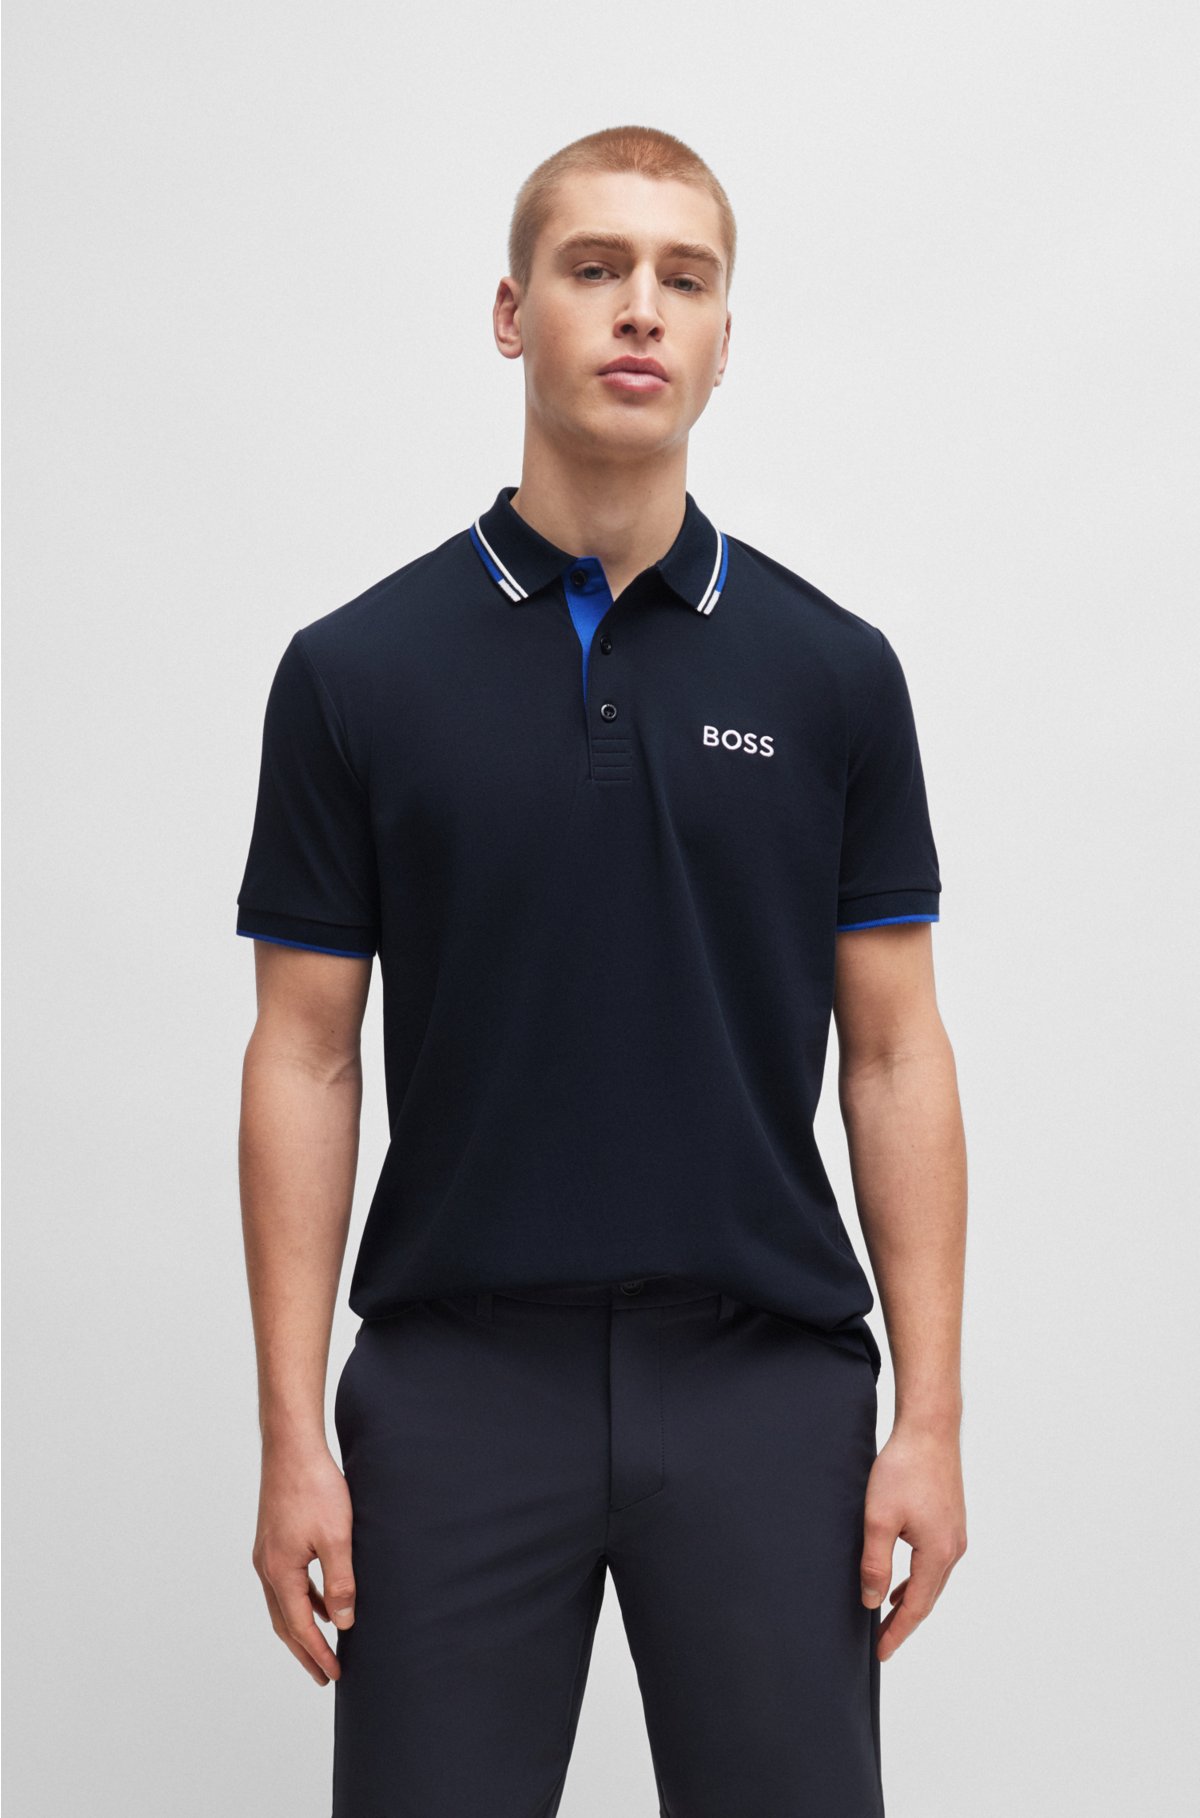 BOSS - Polo shirt contrast logos with